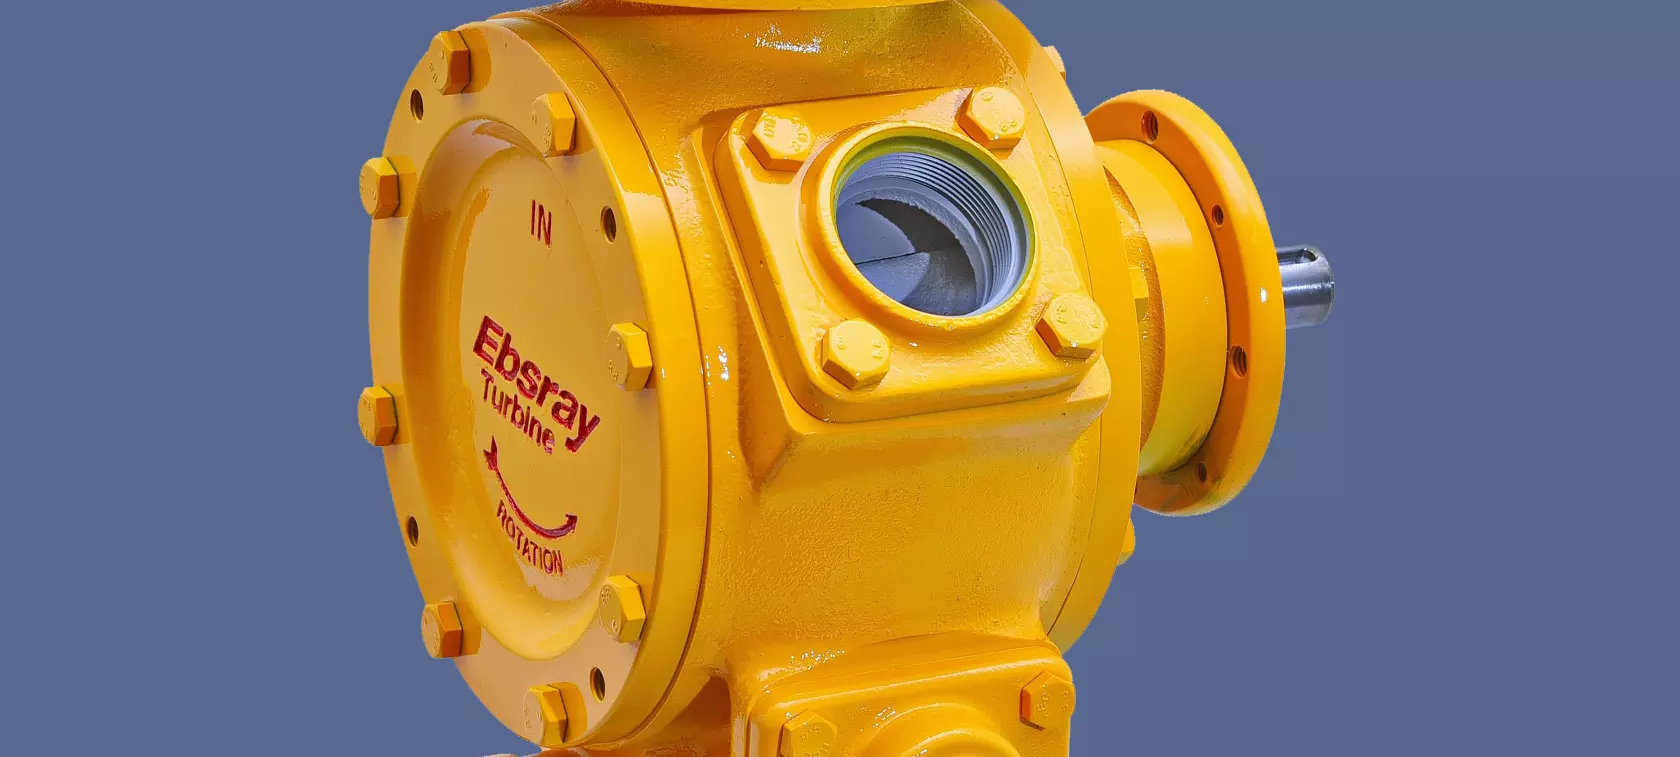 Ebsray to debut R75 pump at AEGPL Congress